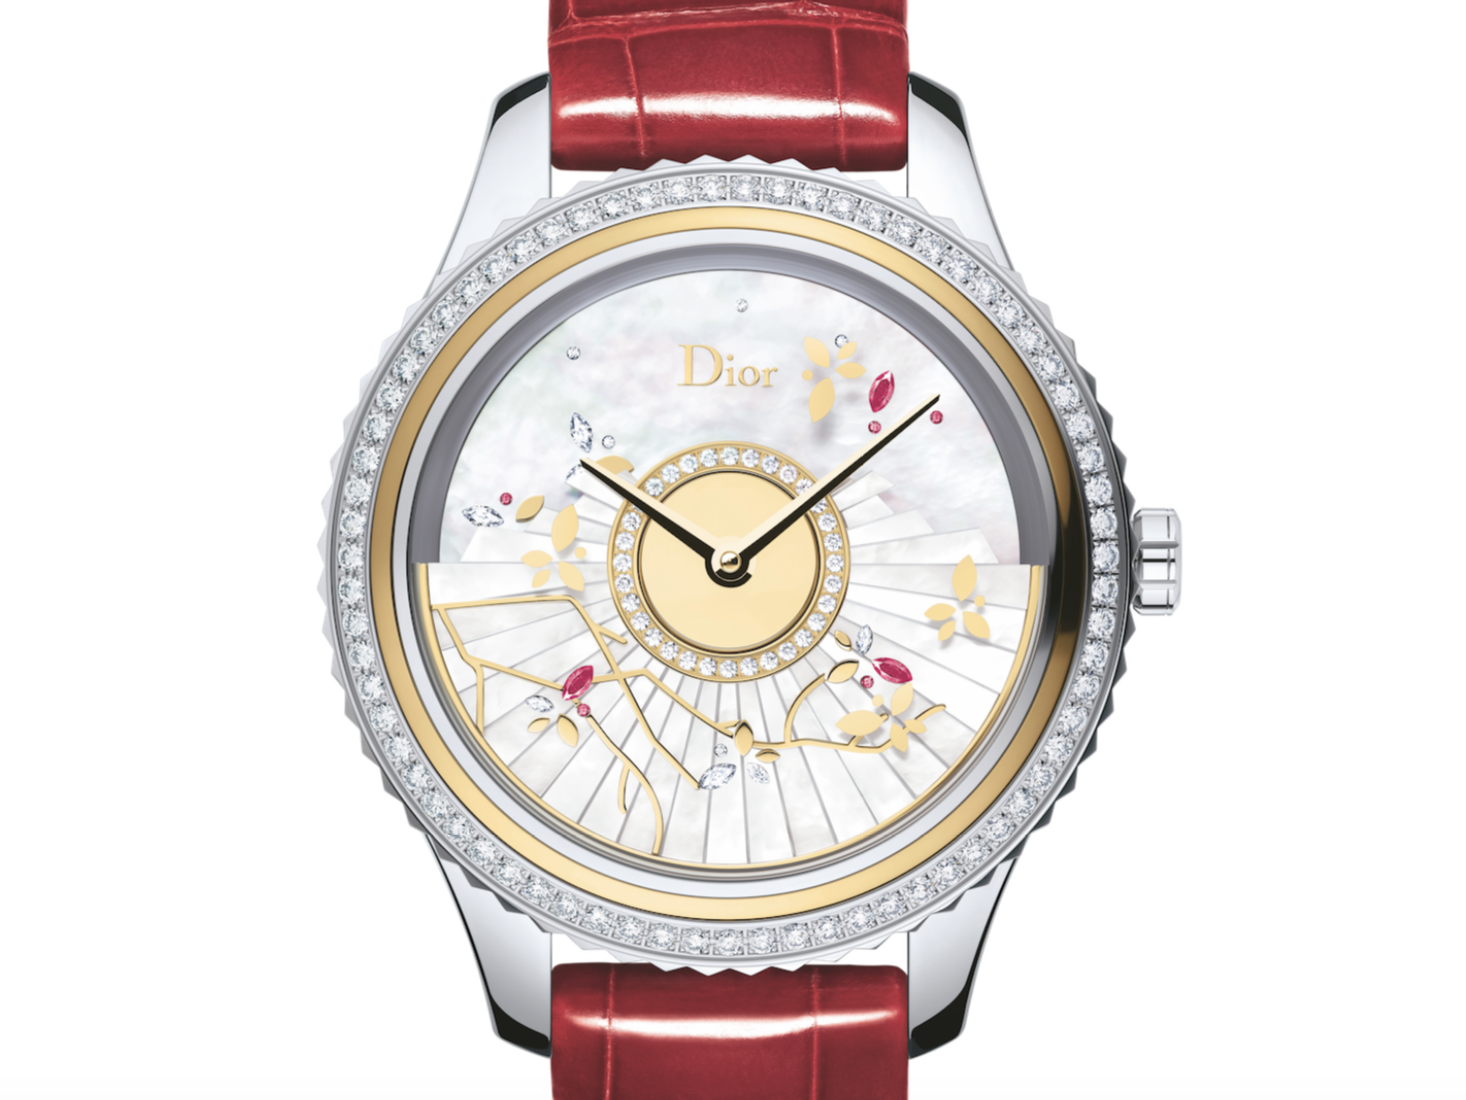 Dior Grand Bal Fete du Printemps Limited Edition 2018 Chinese New Year